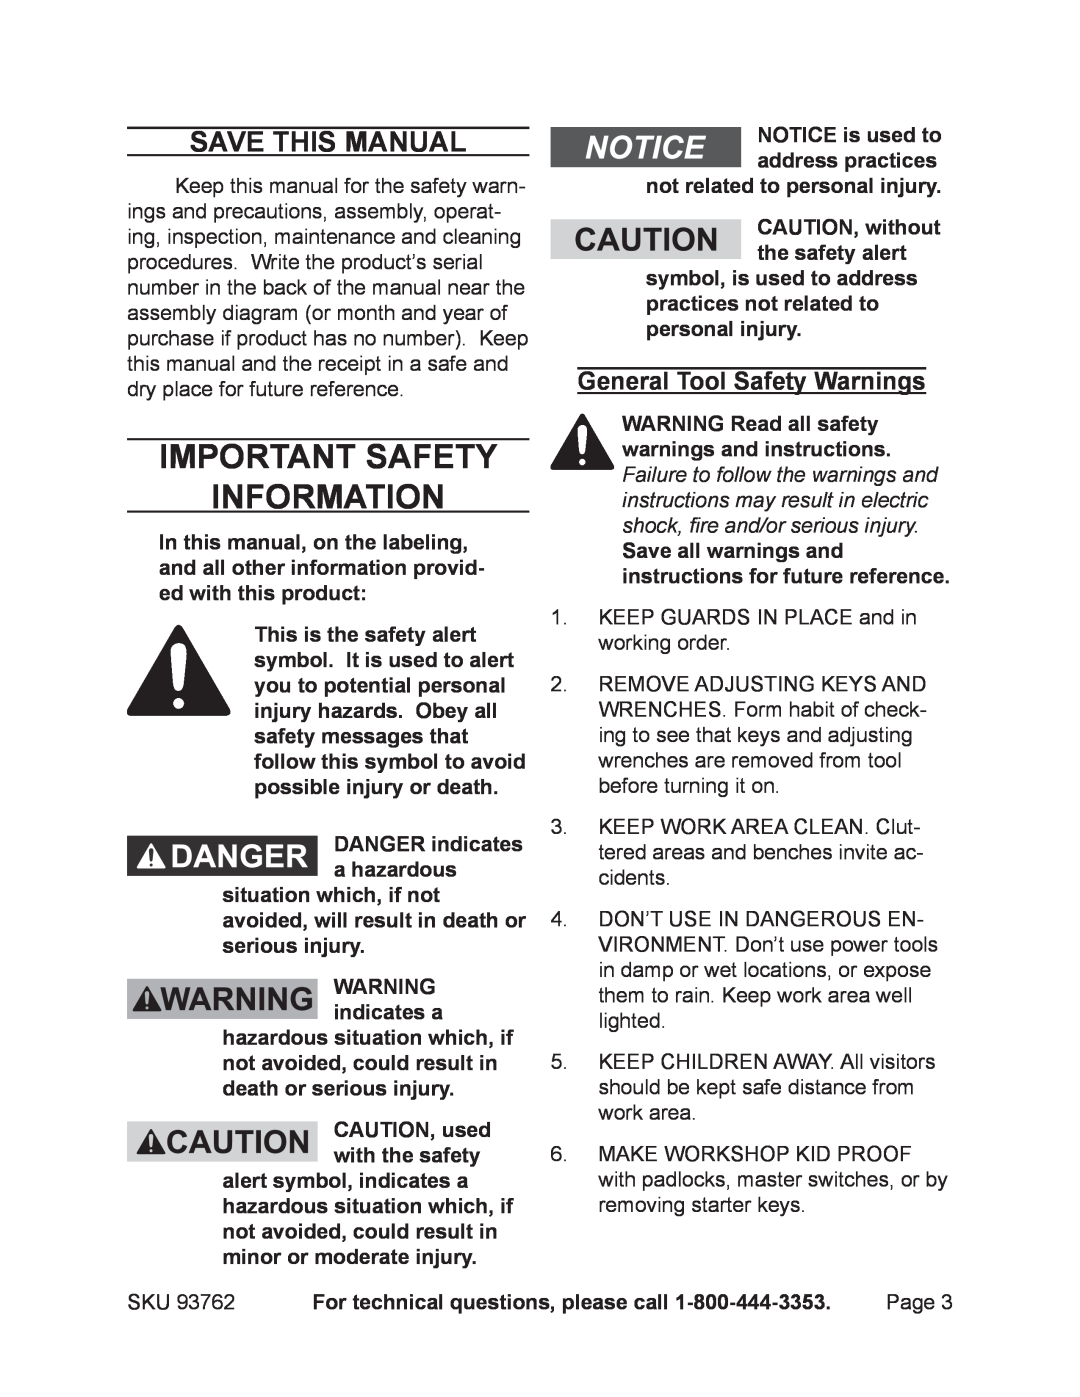 Harbor Freight Tools 93762 Important SAFETY Information, Save This Manual, DANGER indicates a hazardous 